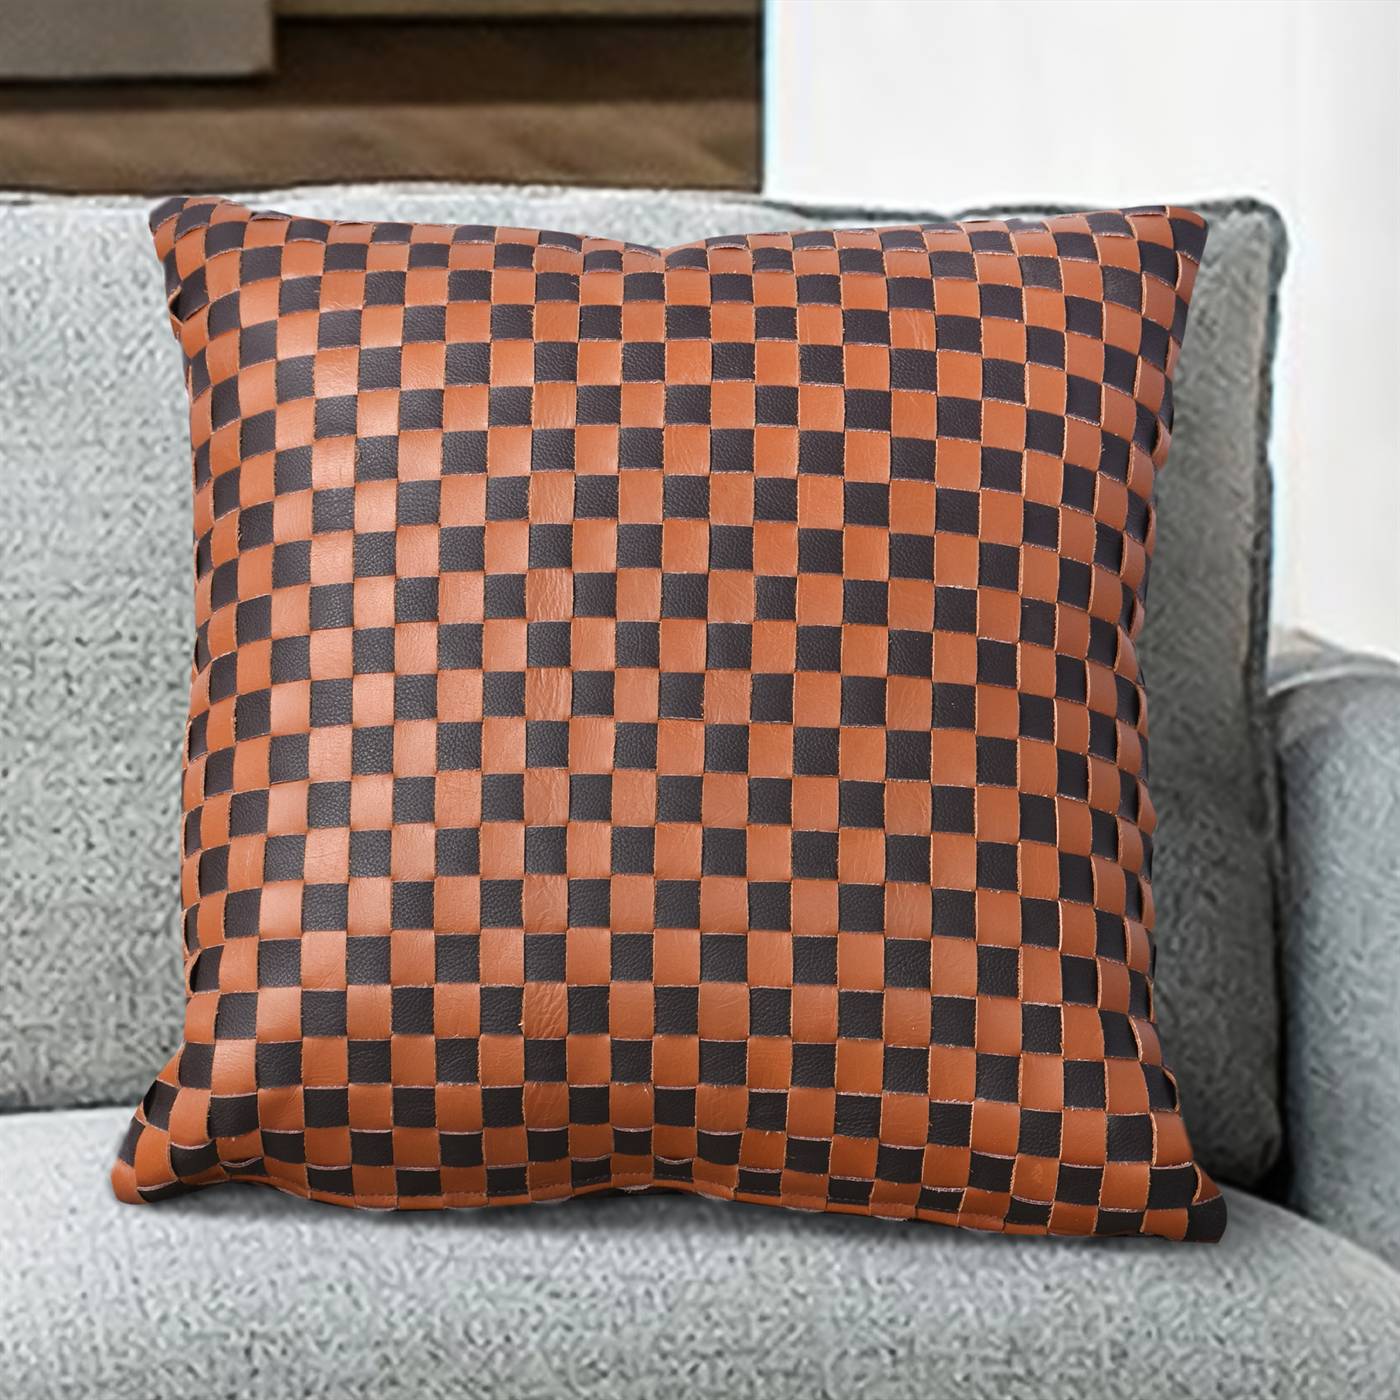 Lombardy Cushion, 50x50 cm, Brown, Tan, Leather, Hand Made, Hm Stitching, Flat Weave